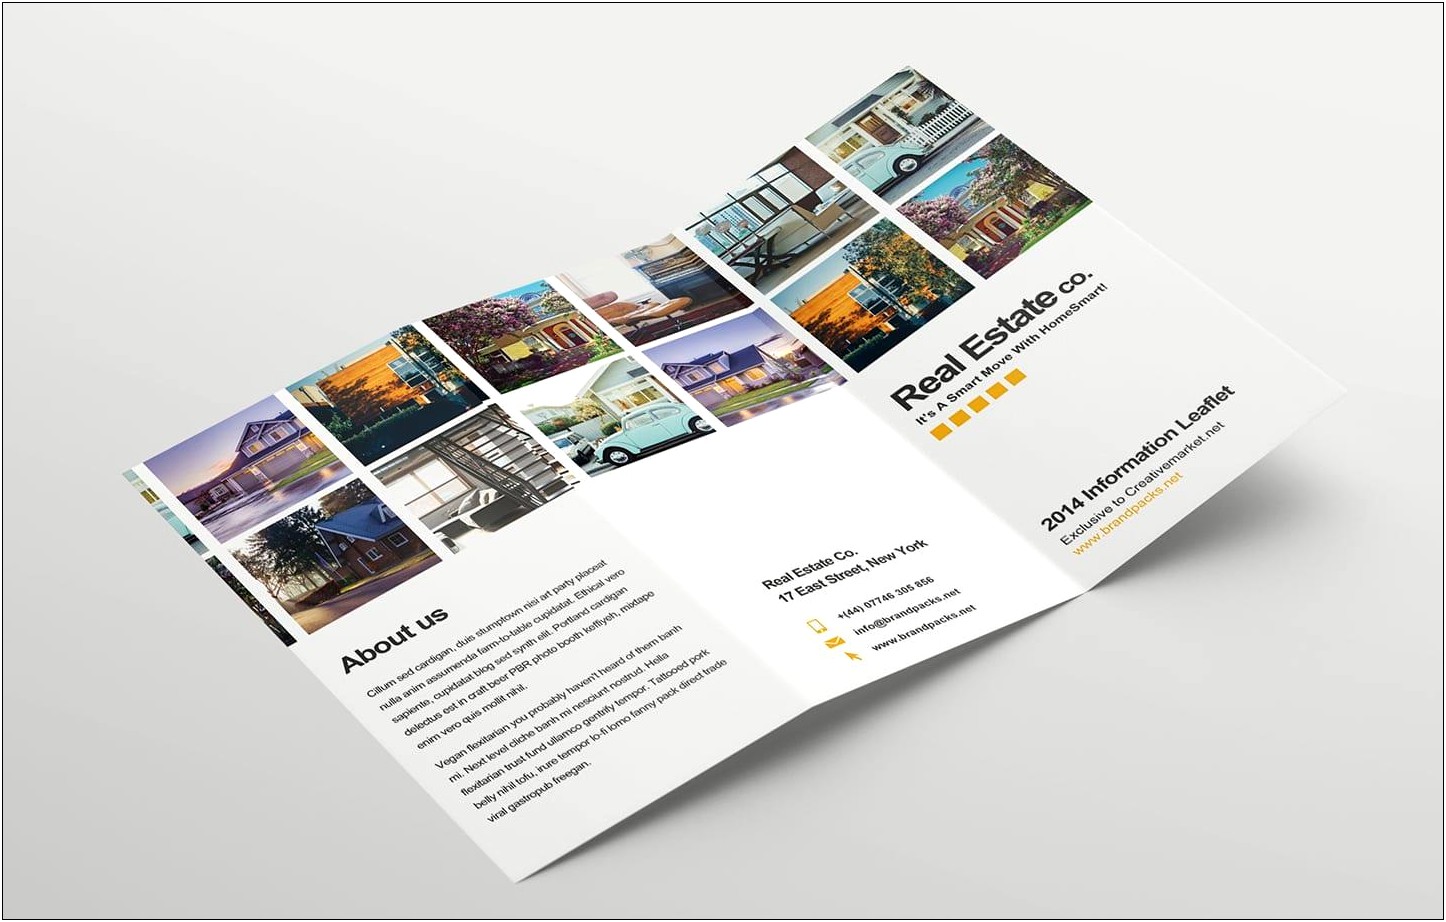 Free Template 0f Brochure For Home Sale